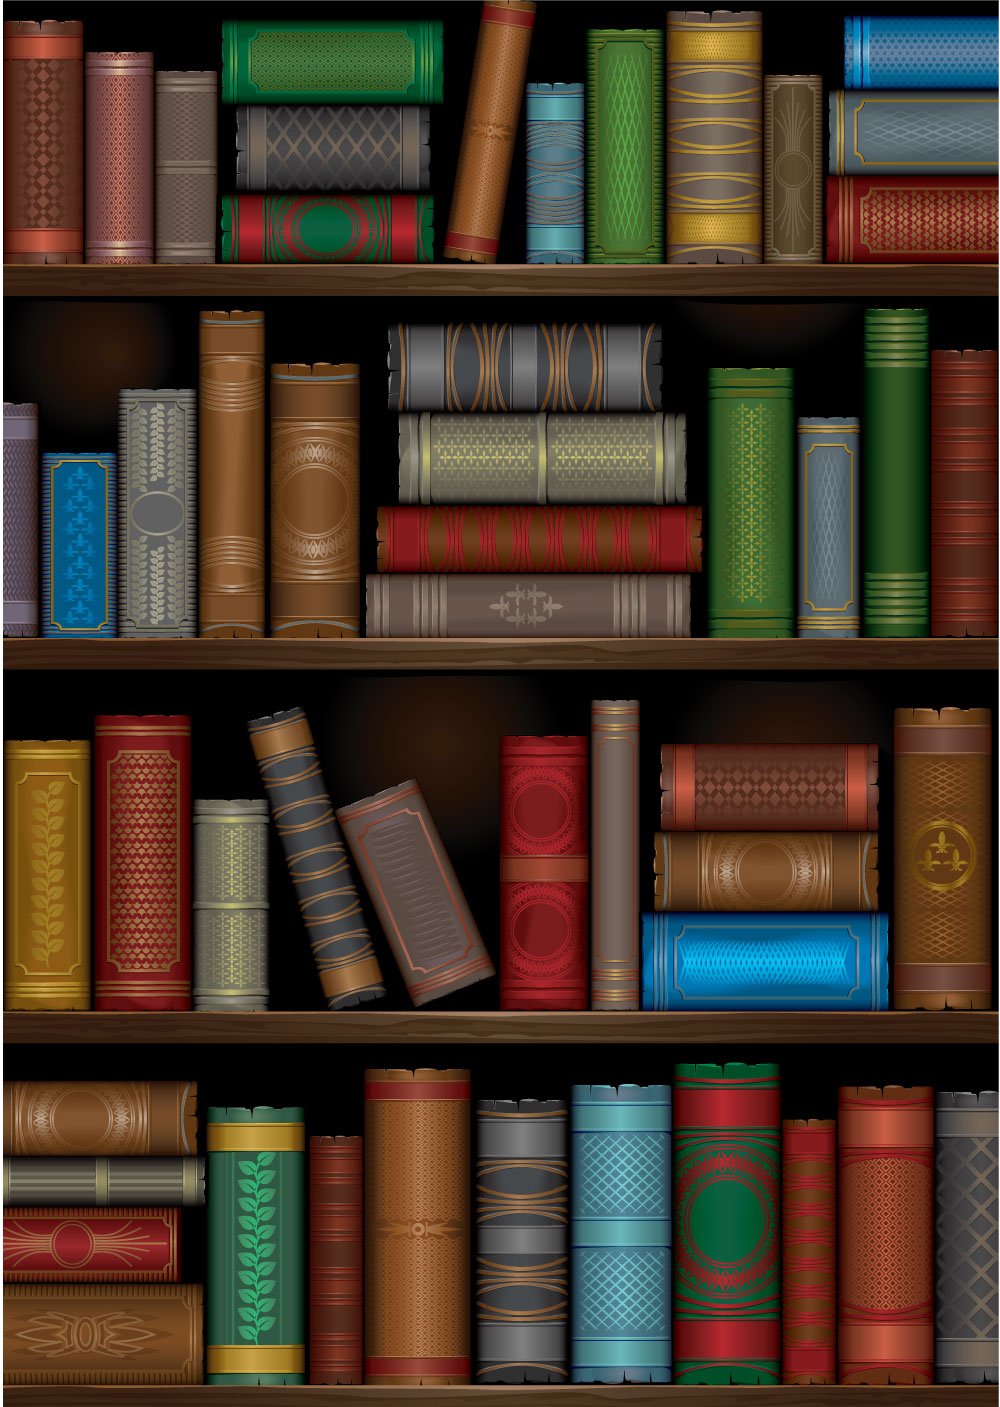 best book library app